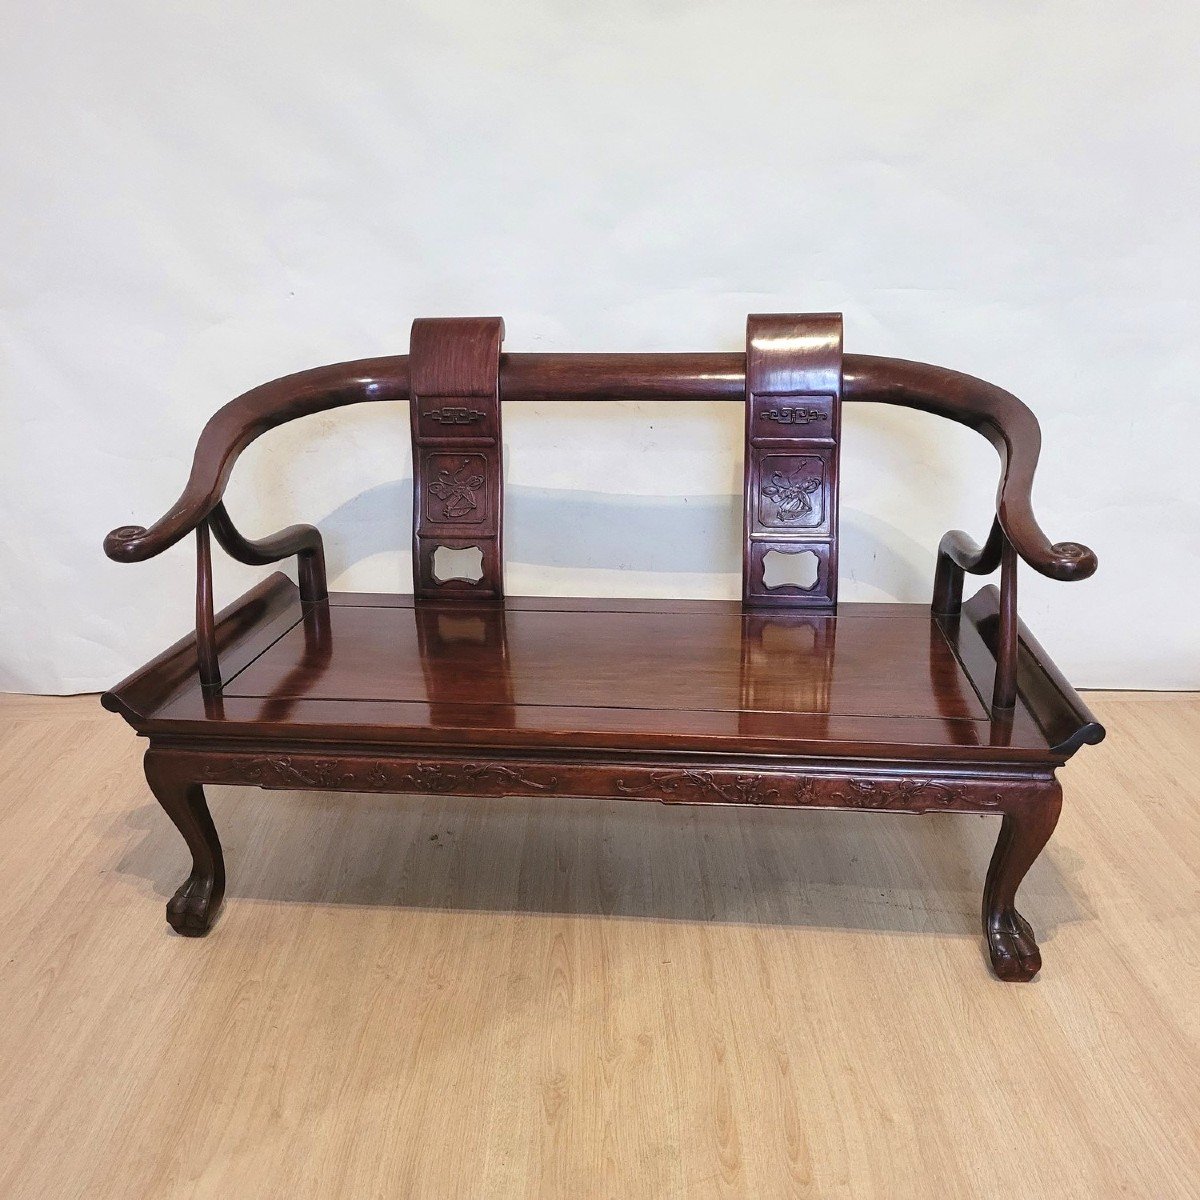 Chinese Carved Wood Bench, Late 19th Early 20th Century